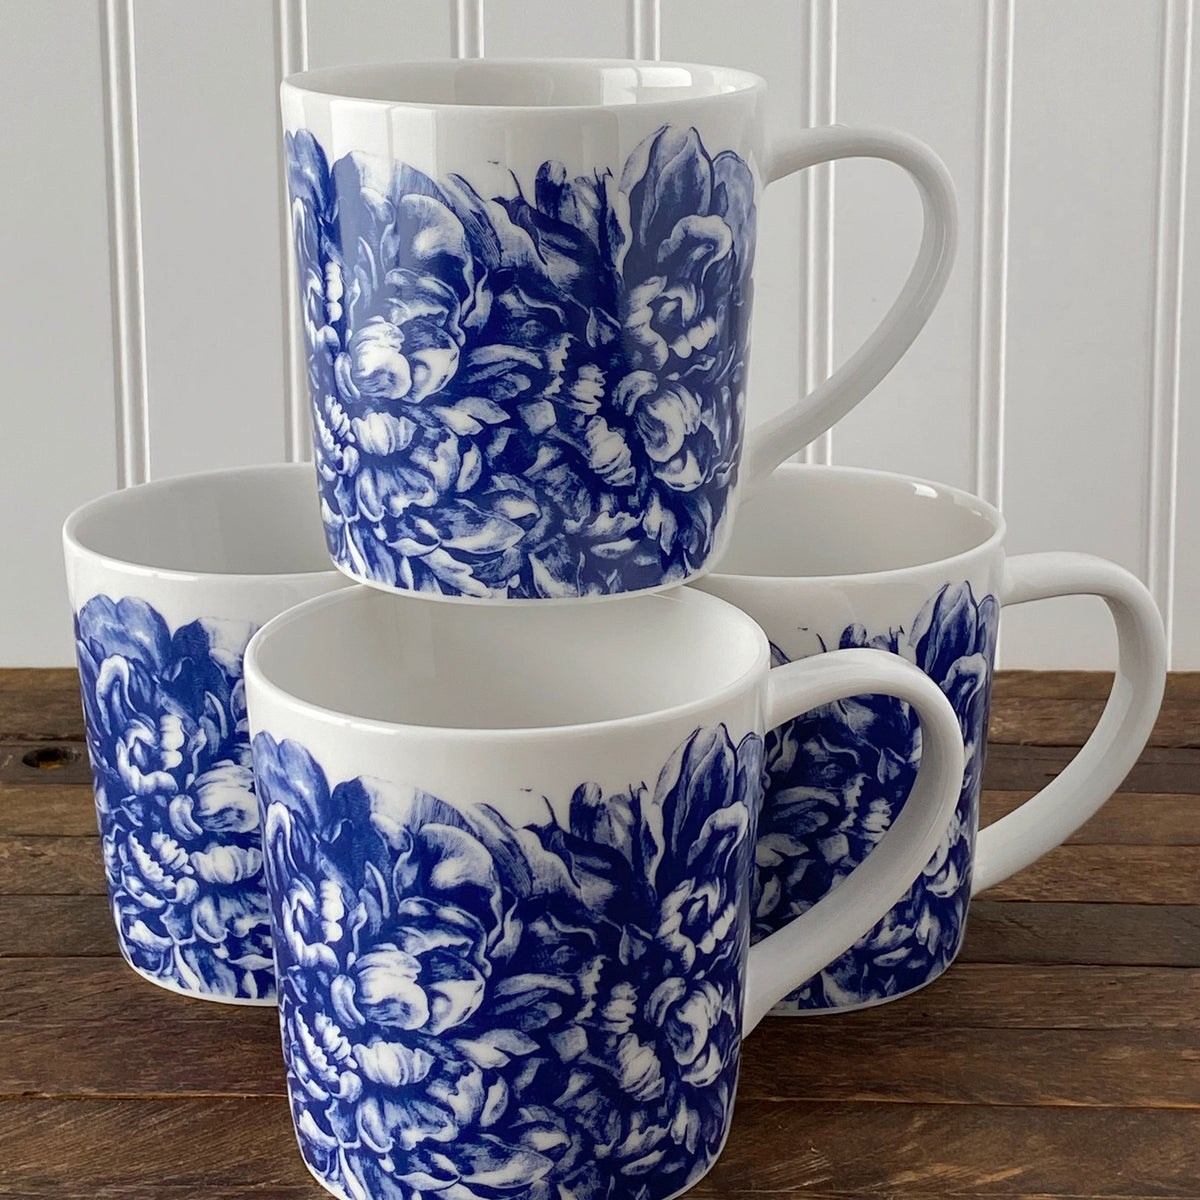 Four Peony mugs from Caskata Artisanal Home with blue floral patterns stacked in pairs on a wooden table, against a white beadboard background.